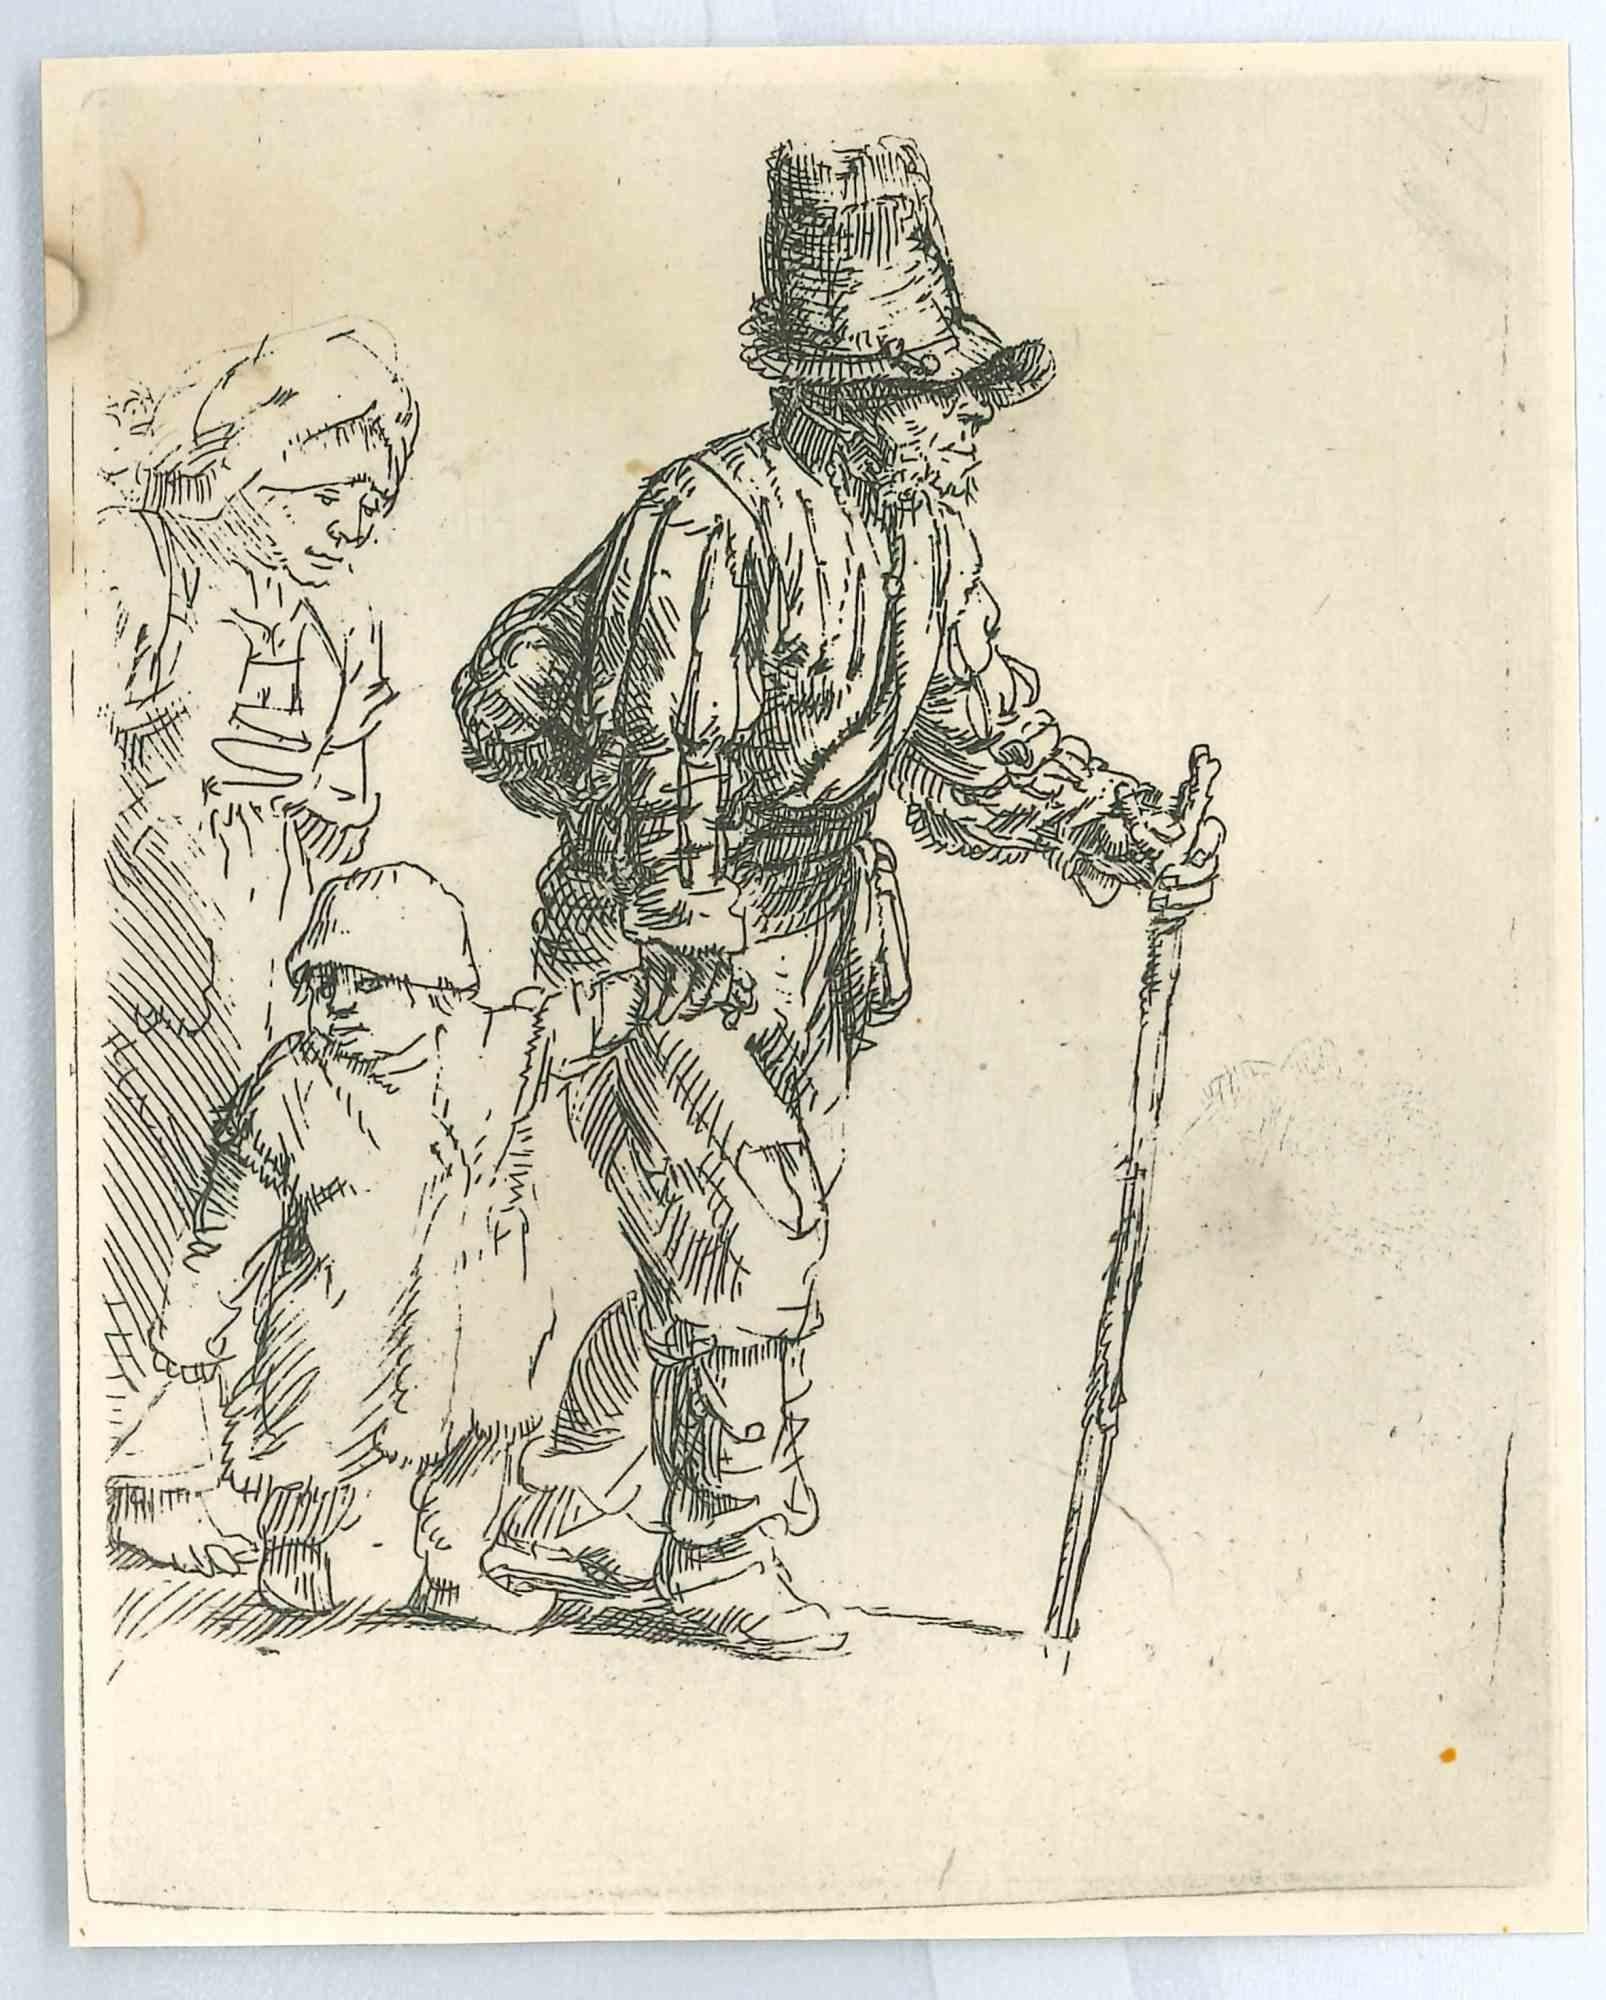 Charles Amand Durand Portrait Print - Peasant Family on the Tramp - Engraving after Rembrandt - 19th Century